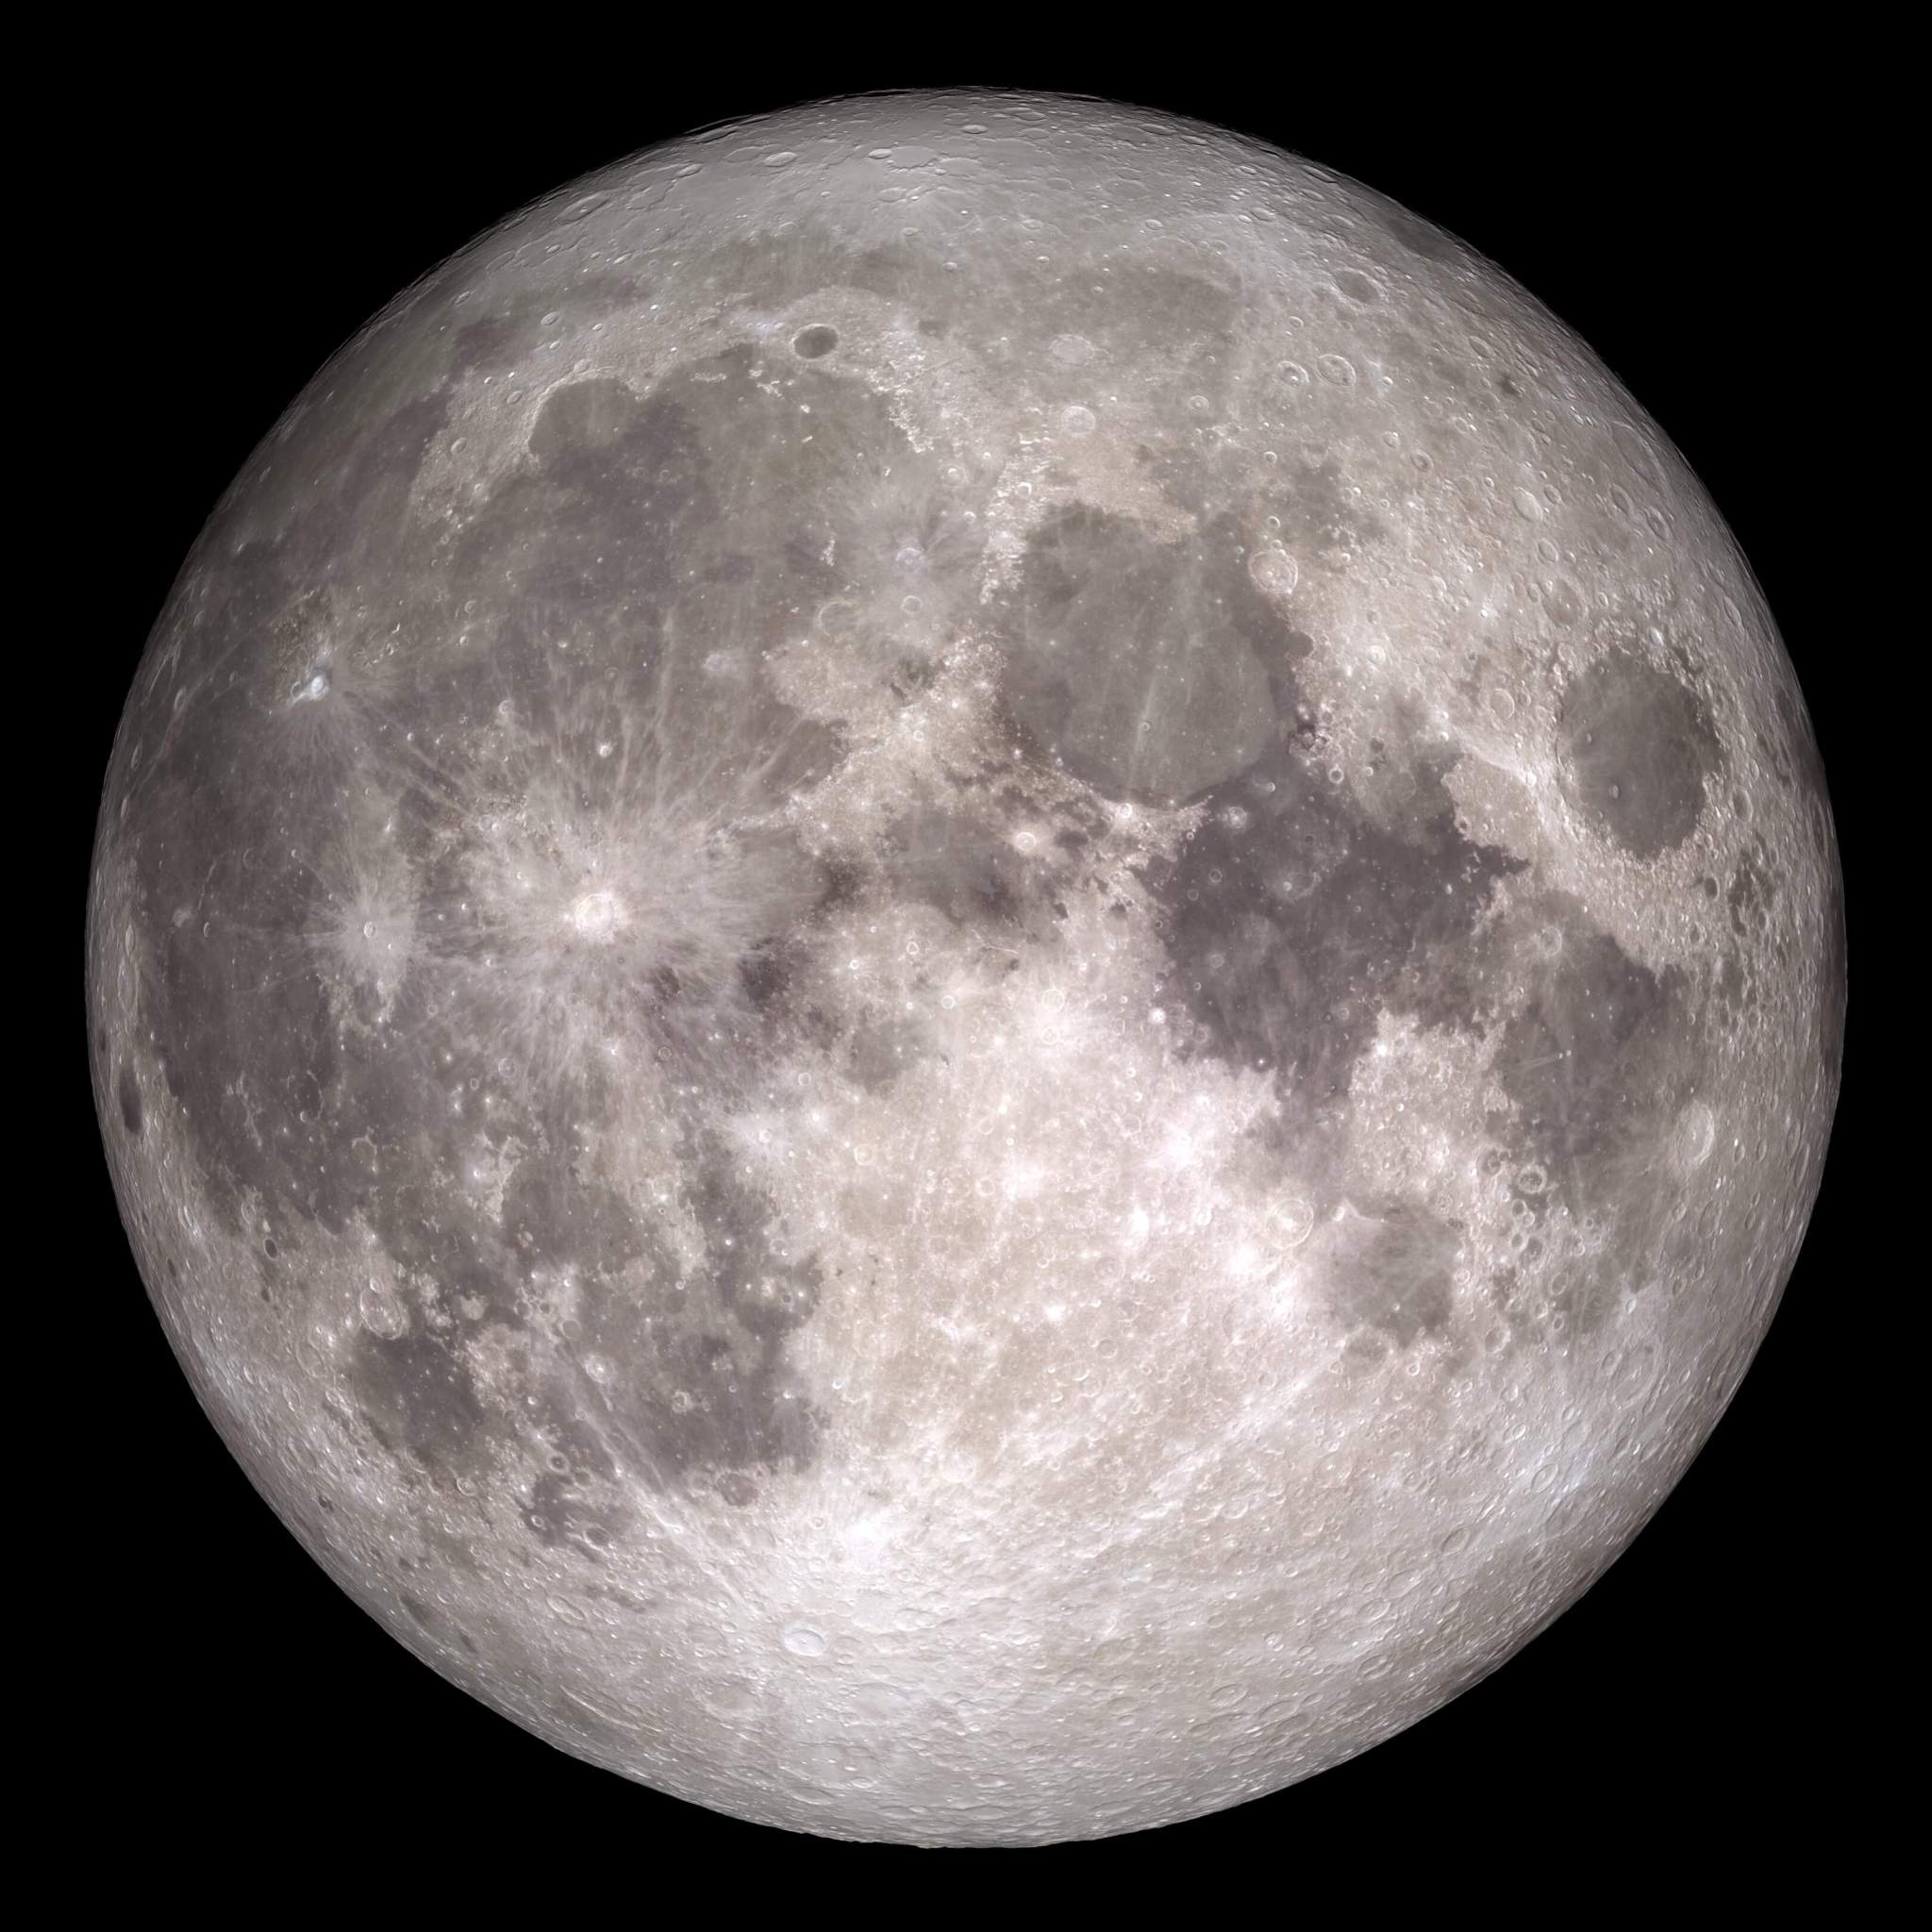 Photographic image of the moon in space